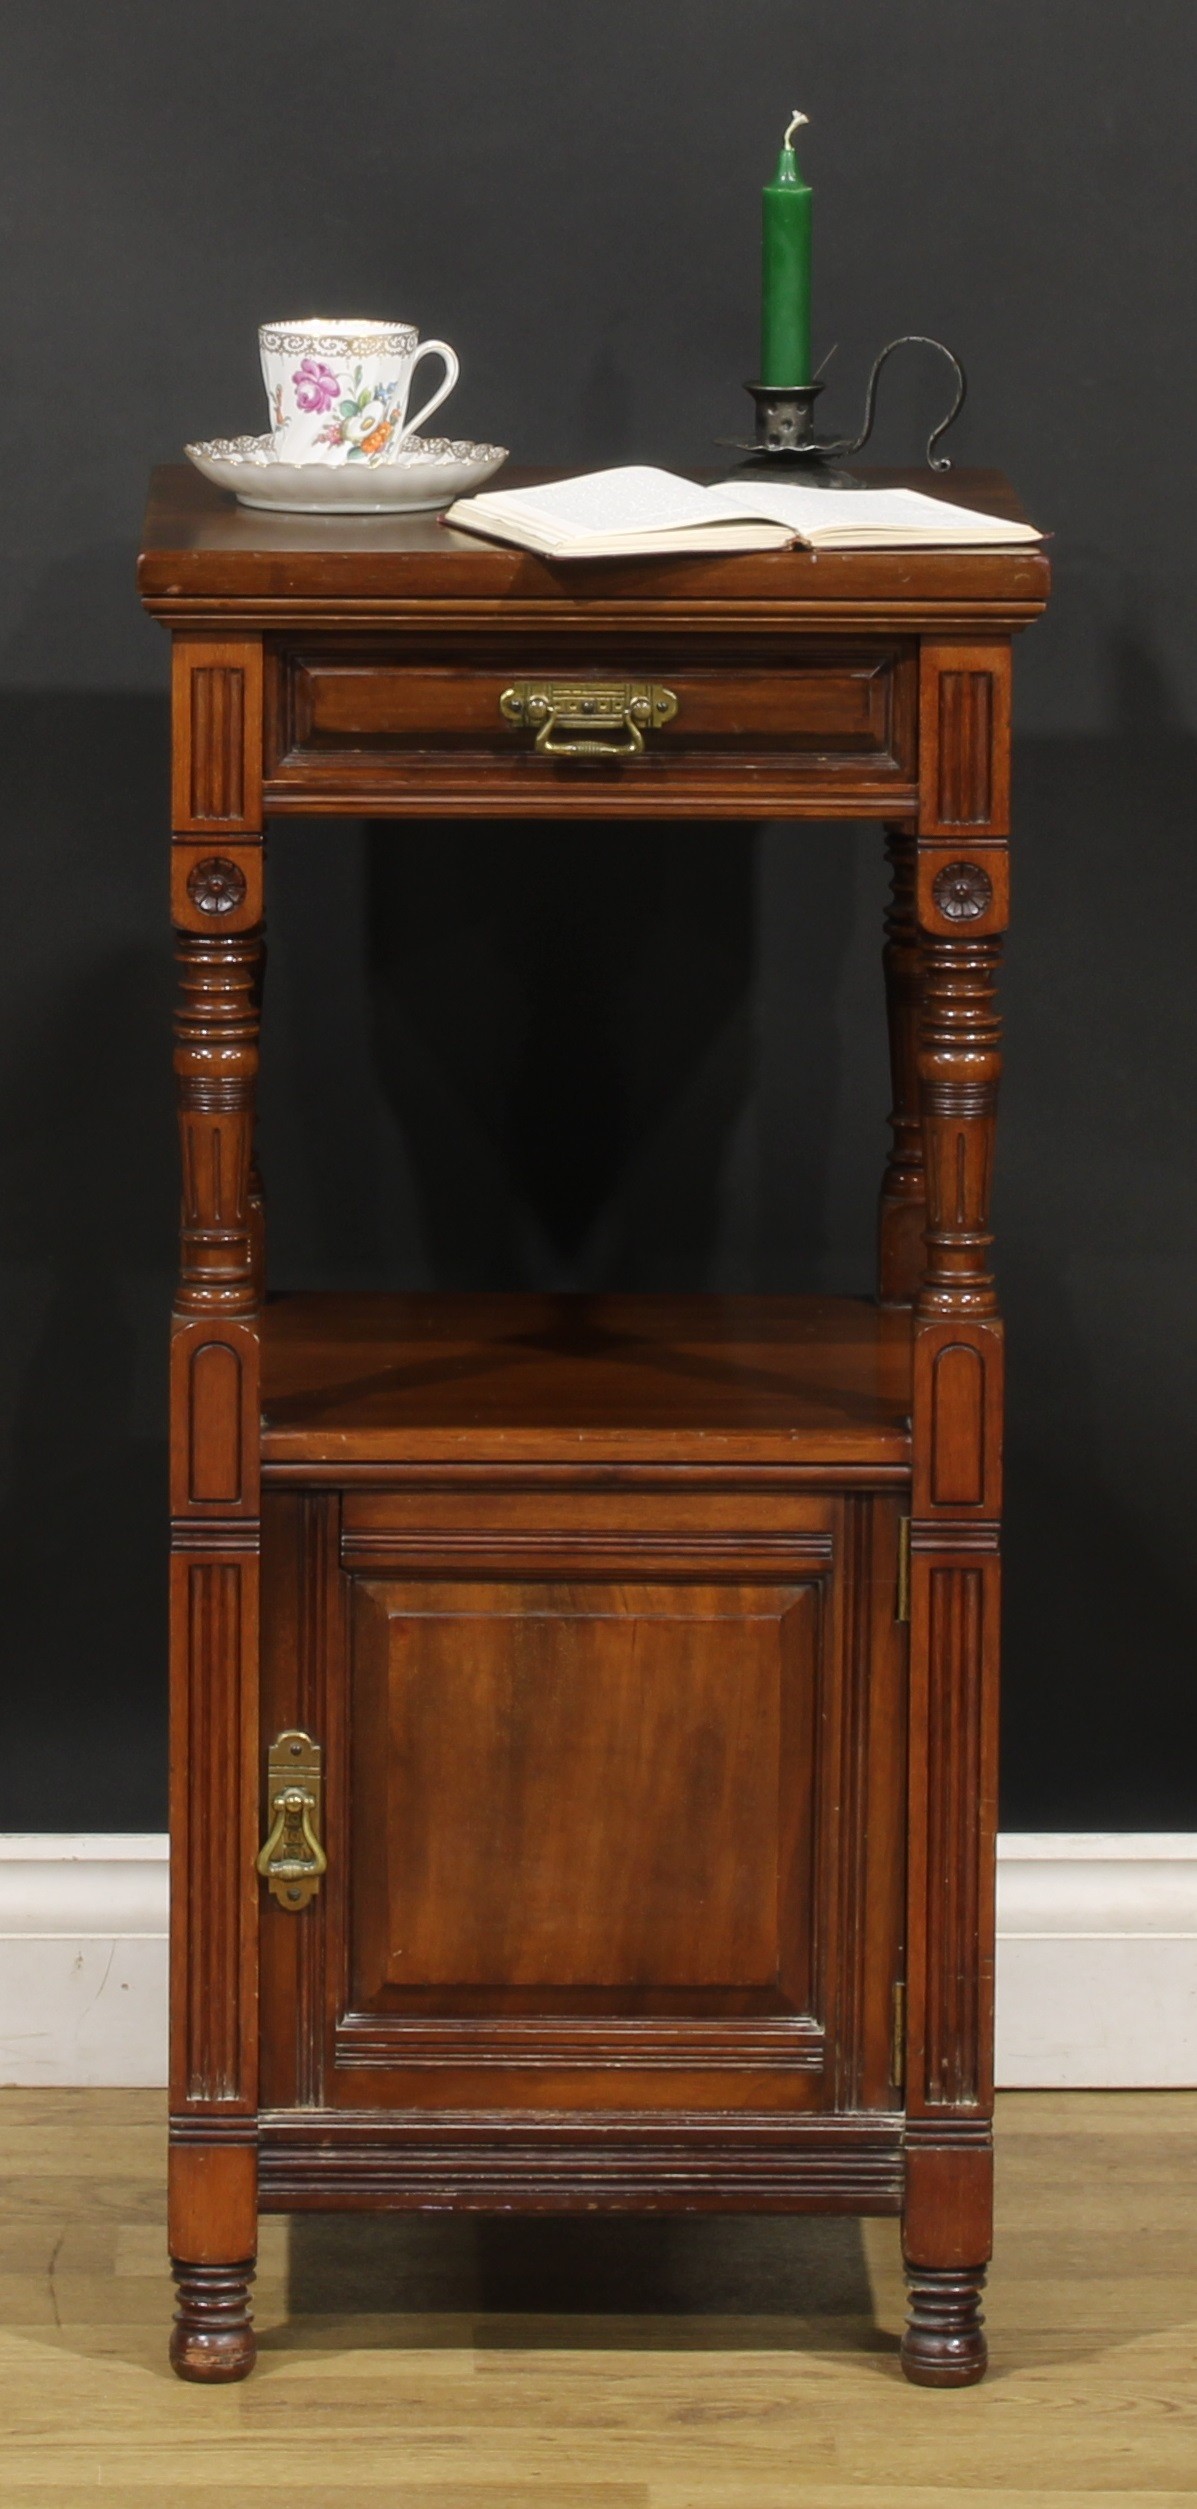 An Aesthetic Movement walnut bedroom cabinet, by Gillows of Lancaster and London, stamped L14946,